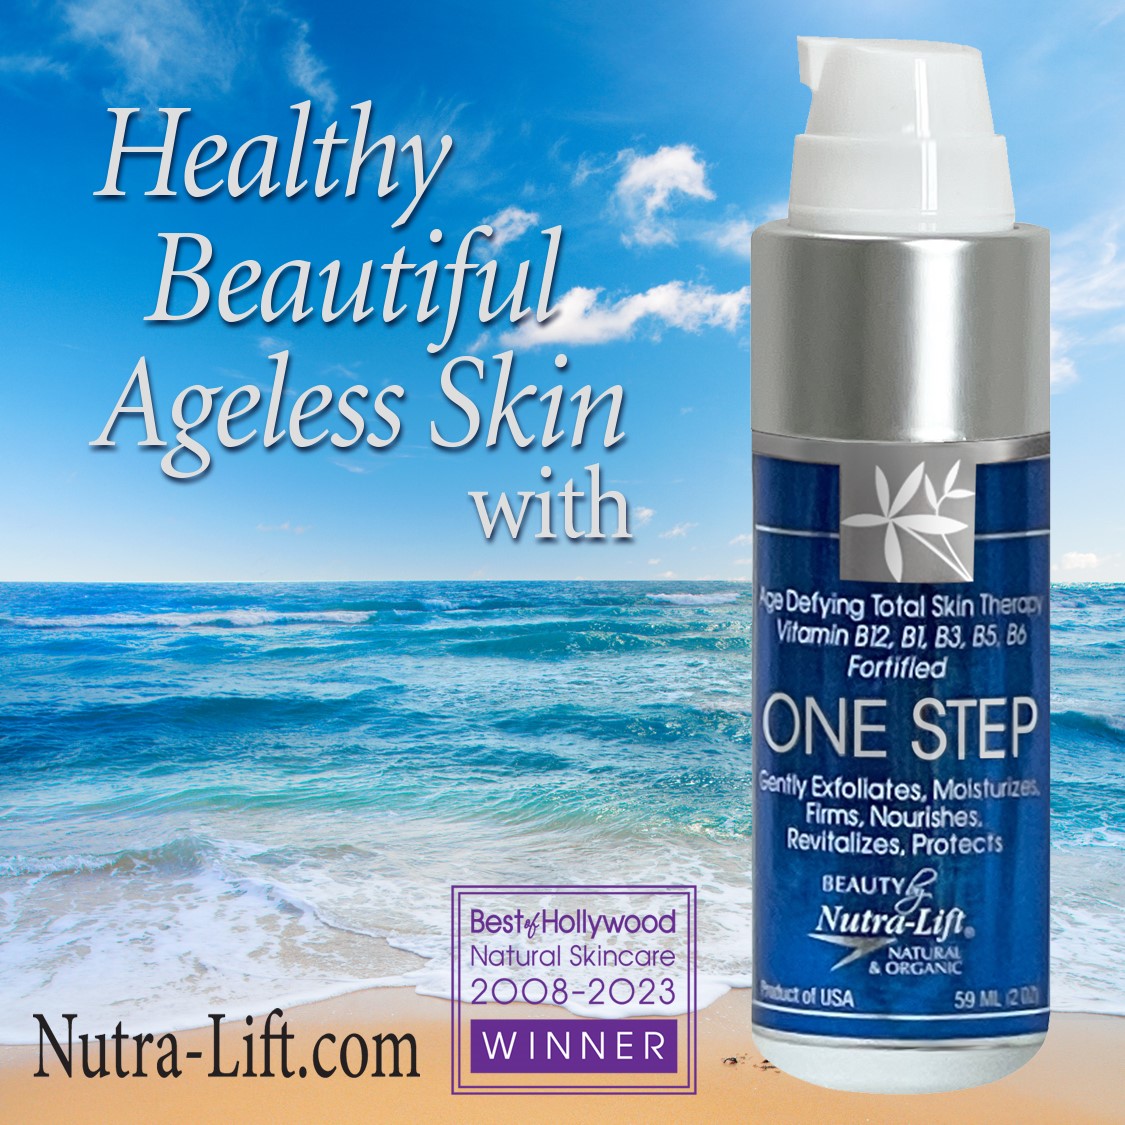 SHOP @ NUTRA-LIFT.COM
#HealthySkin #MADEinUSA #GLOWINGSKIN #VITAMINCSERUM #NaturalSkincare #OrganicBEAUTY #beautycare #facial #Collagen #Hyaluronicacid #Antiwrinkle #cleanbeauty #greenbeauty #skincare #USA Affordable FEATURED by RACHAEL RAY NUTRA-LIFT.COM